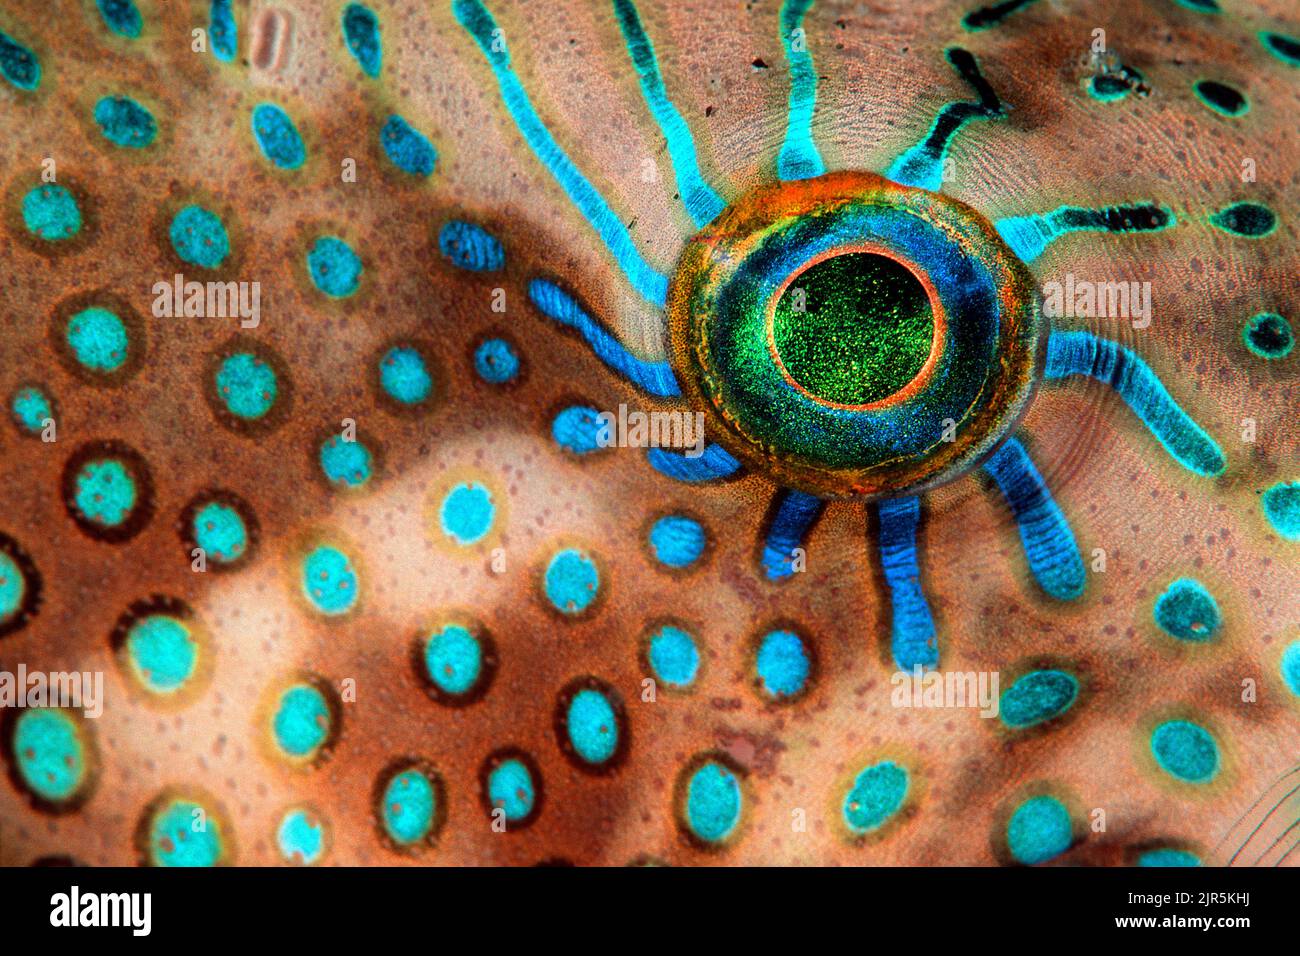 Pearl toby (Canthigaster margaritata), Augendetail, Sinai, Ägypten, Rotes Meer Stockfoto